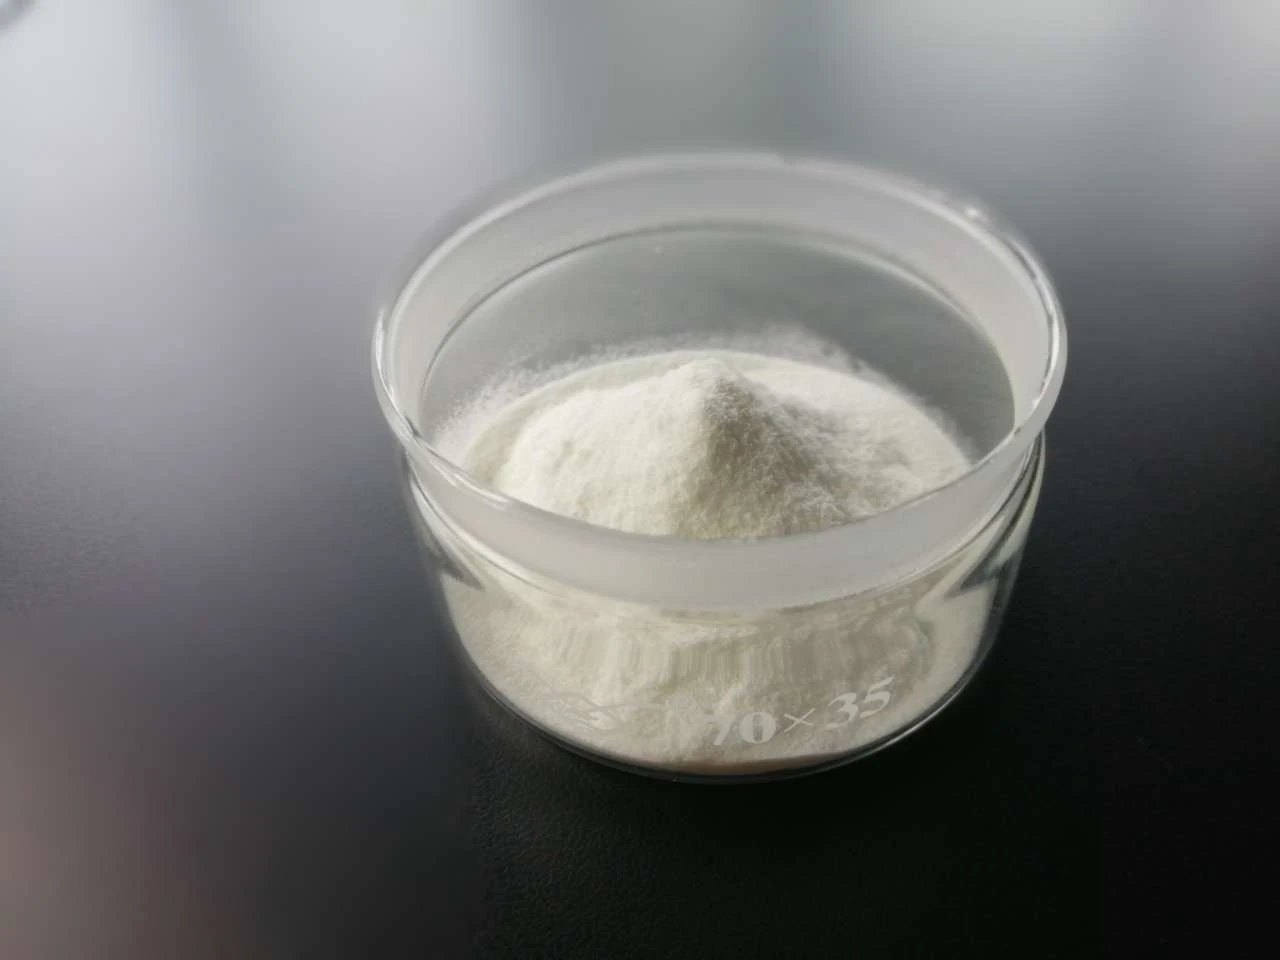 pure hydrolyzed deep sea fish scale collagen peptide powder for skin whitening fish collagen